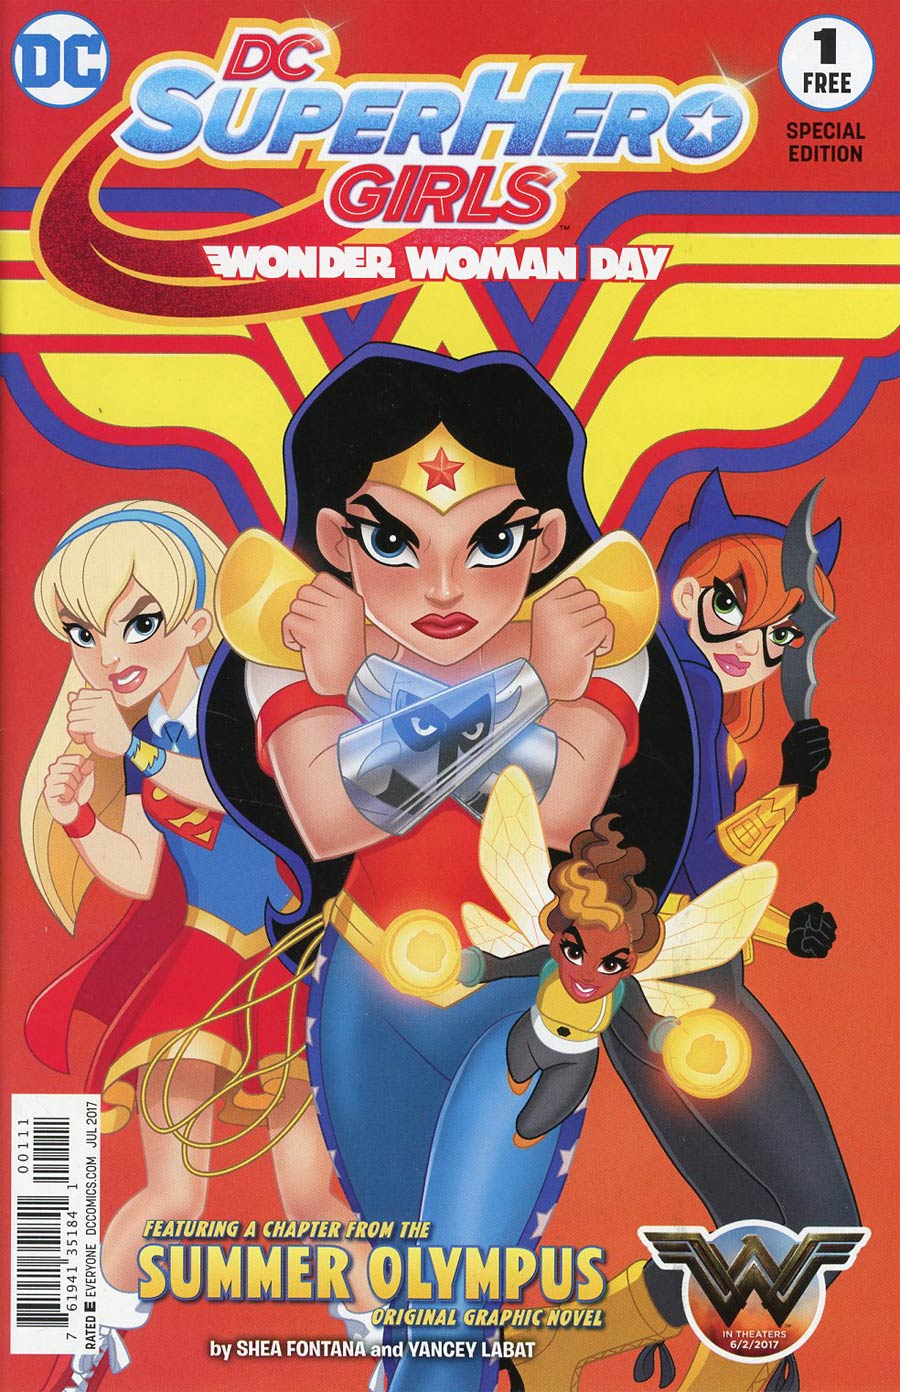 DC Super Hero Girls Wonder Woman Day Special Edition #1